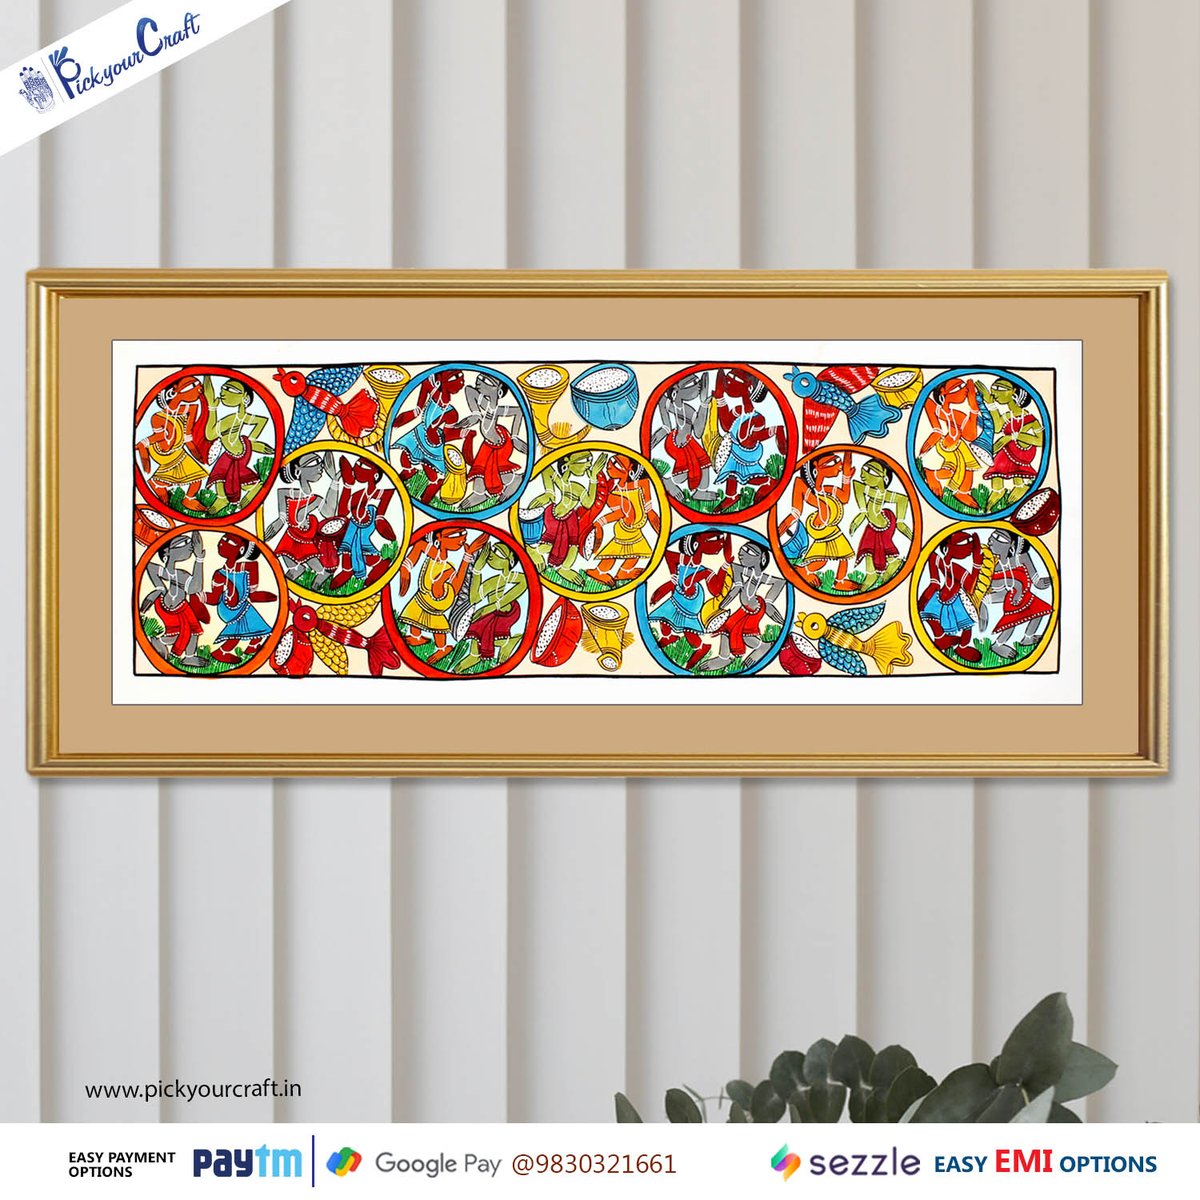 Unique hand painting of tribal scene. Patachitra.
Shop Now-
pickyourcraft.in/patachitra_tri…
#Handmadedilse #Atmanirbhar
#addcolourstoyourspace #handmadewithlove #Gifts
#love #giftideas #patachitraart #wallart